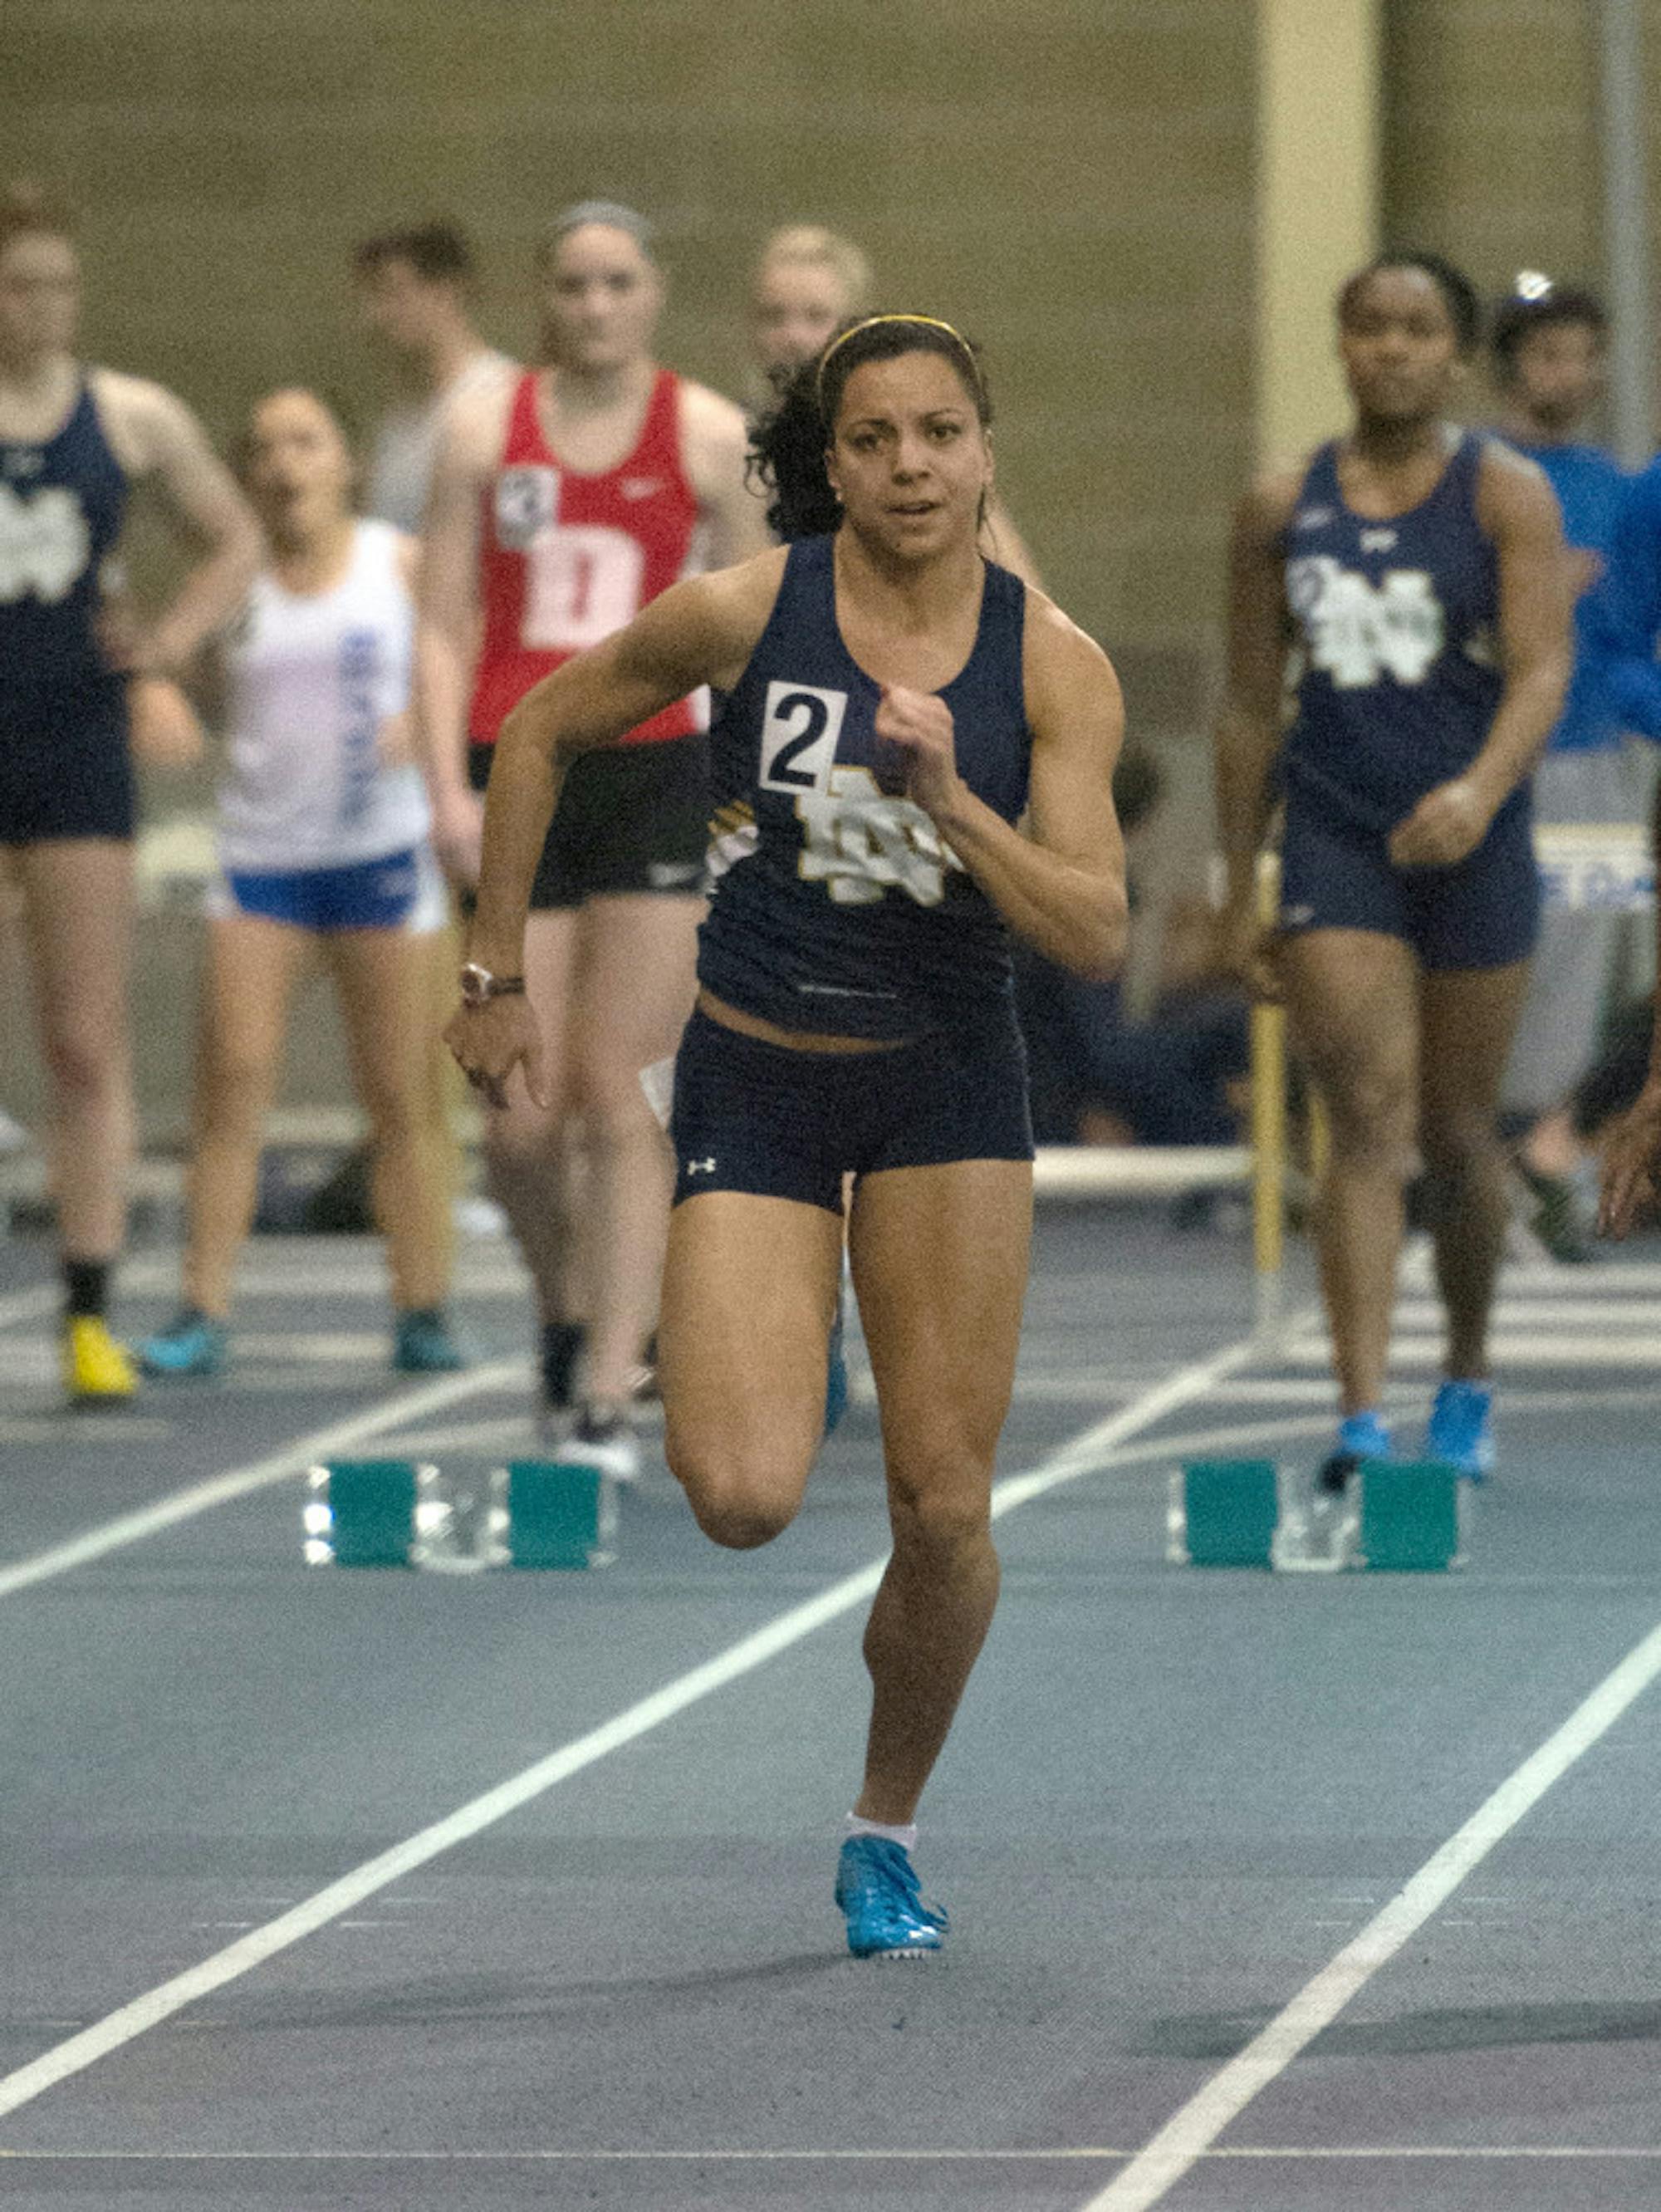 Irish senior Jade Barber competes in the 60-meter dash at the Blue & Gold Invitational on Dec. 5 at Loftus Sports Center. Barber took first place in the finals with a time of 7.59 seconds.